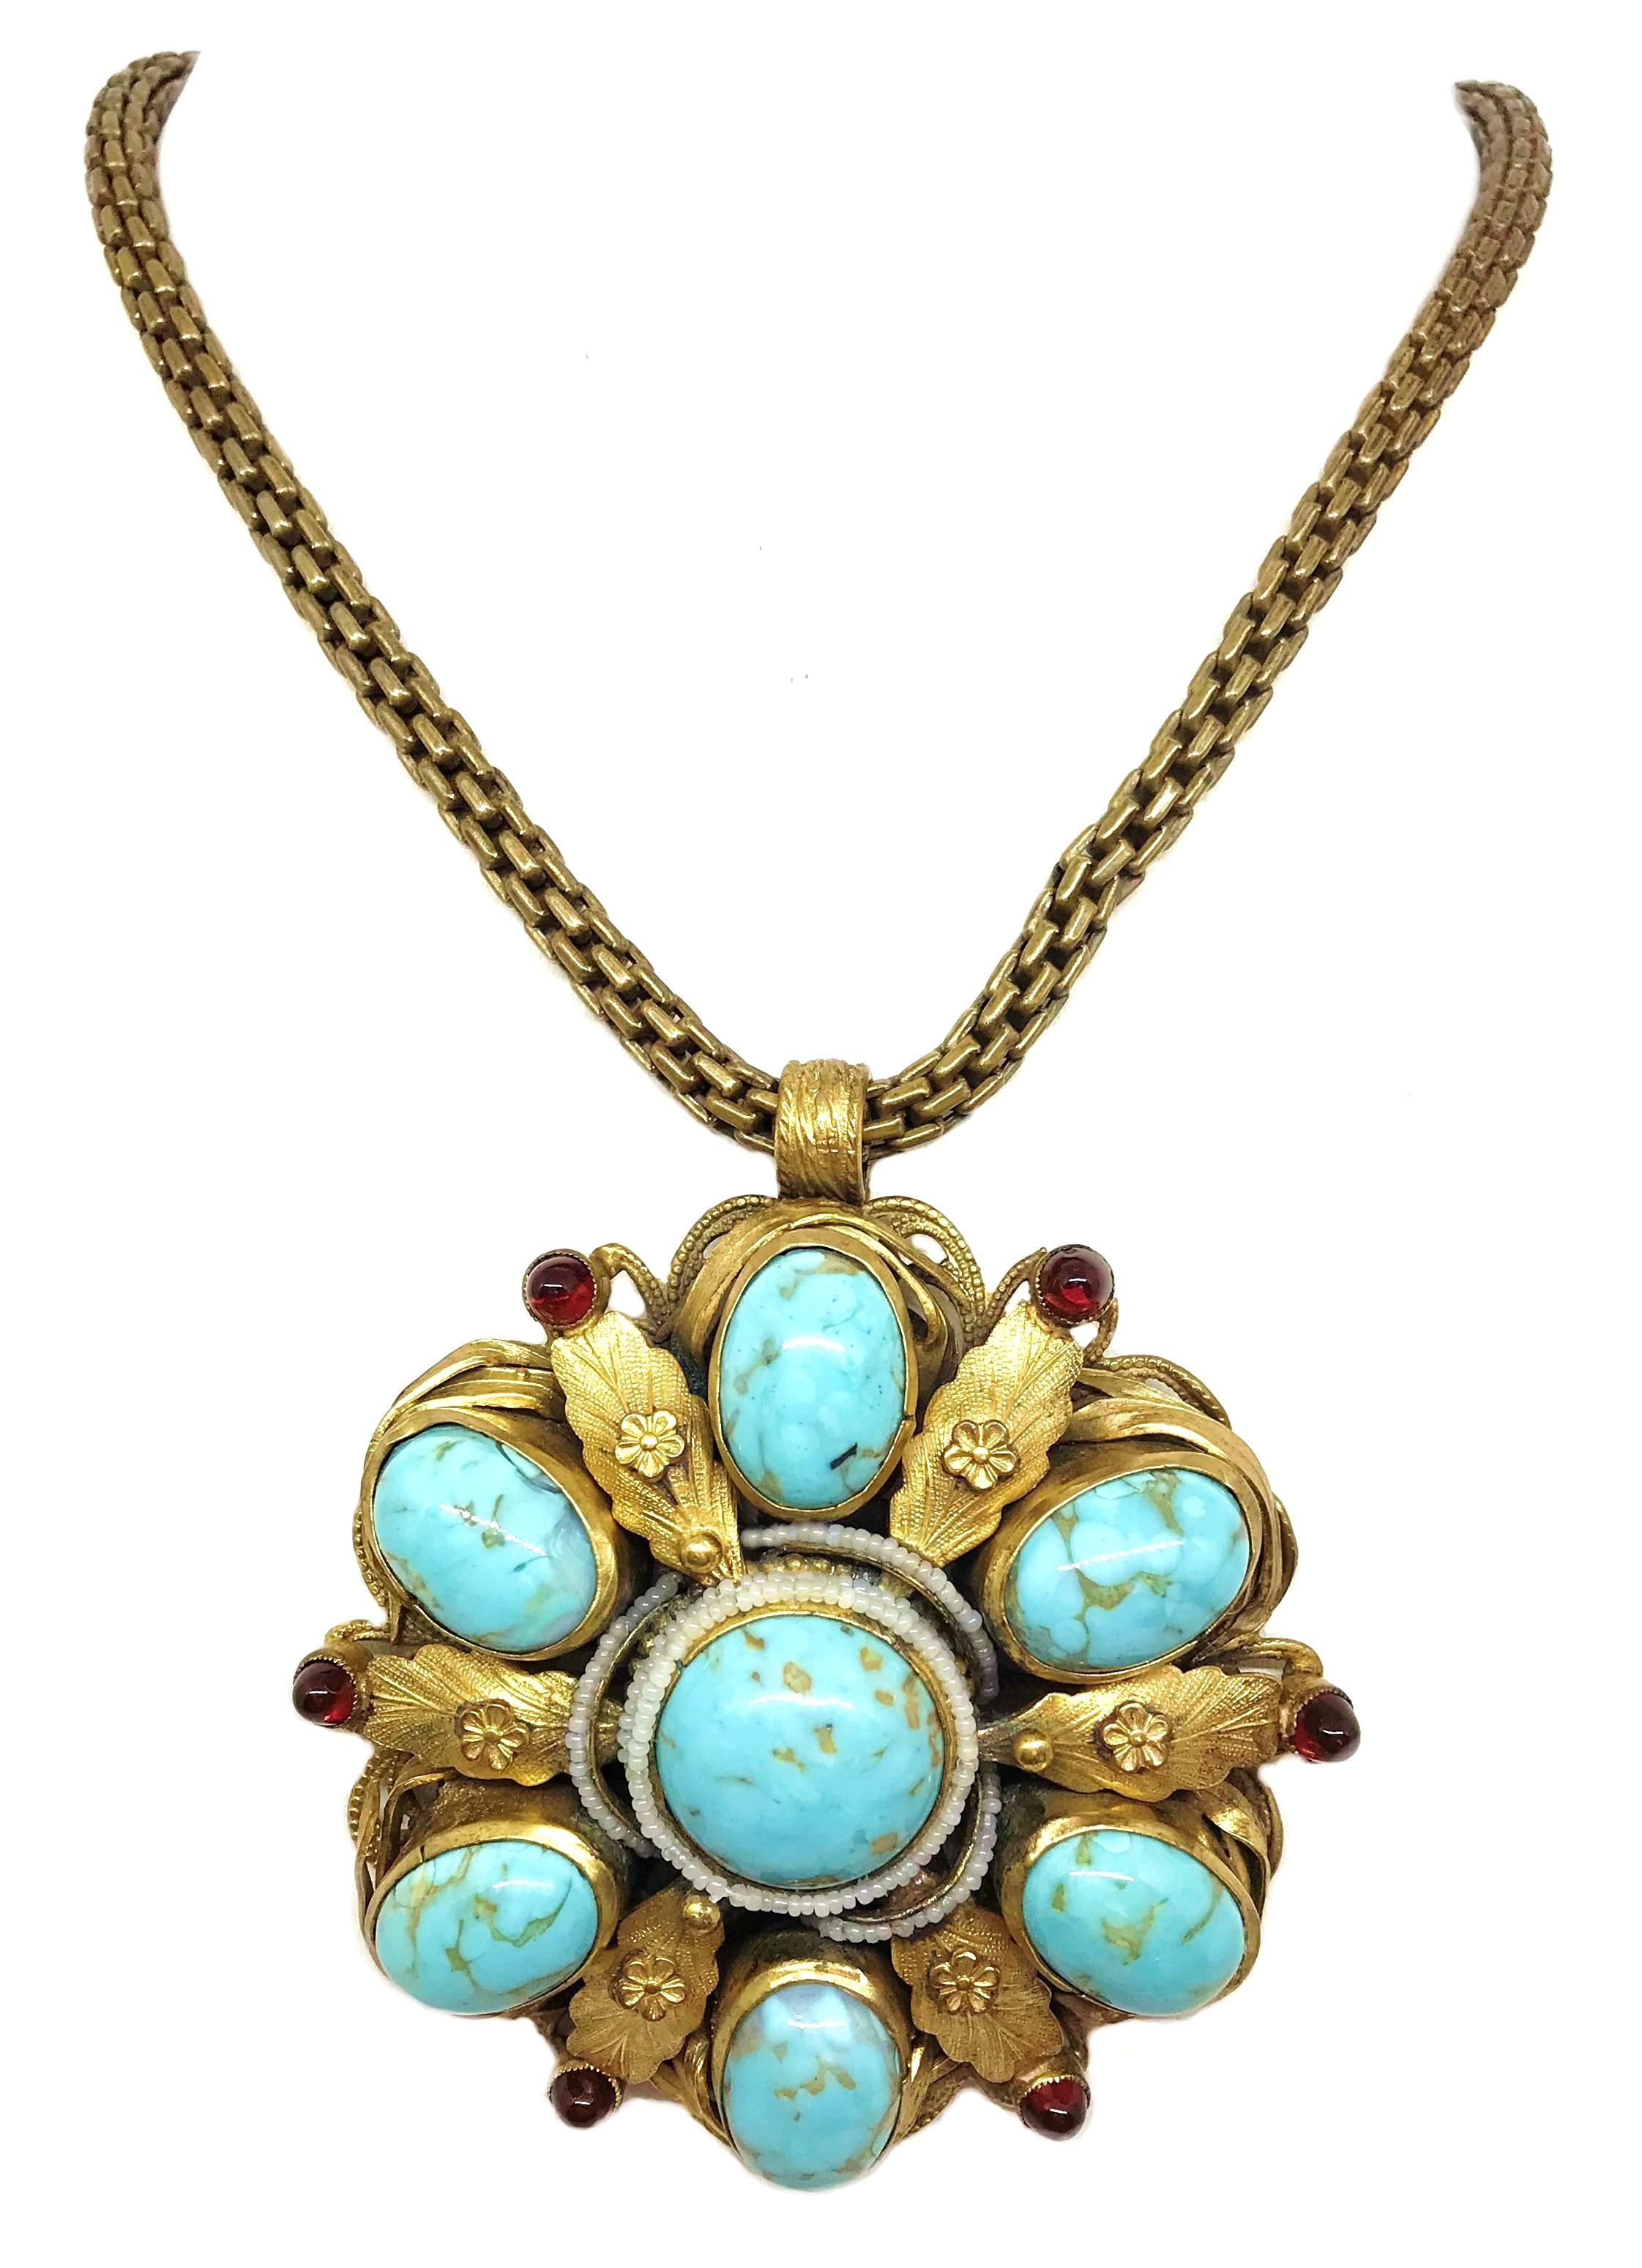 Circa 1940s gold tone metal chain necklace with a large, ornate pendant bezel set with oval and round turquoise glass cabochons. The pendant is  embellished with small glass pearl beads and red glass cabochons and measures 3.25